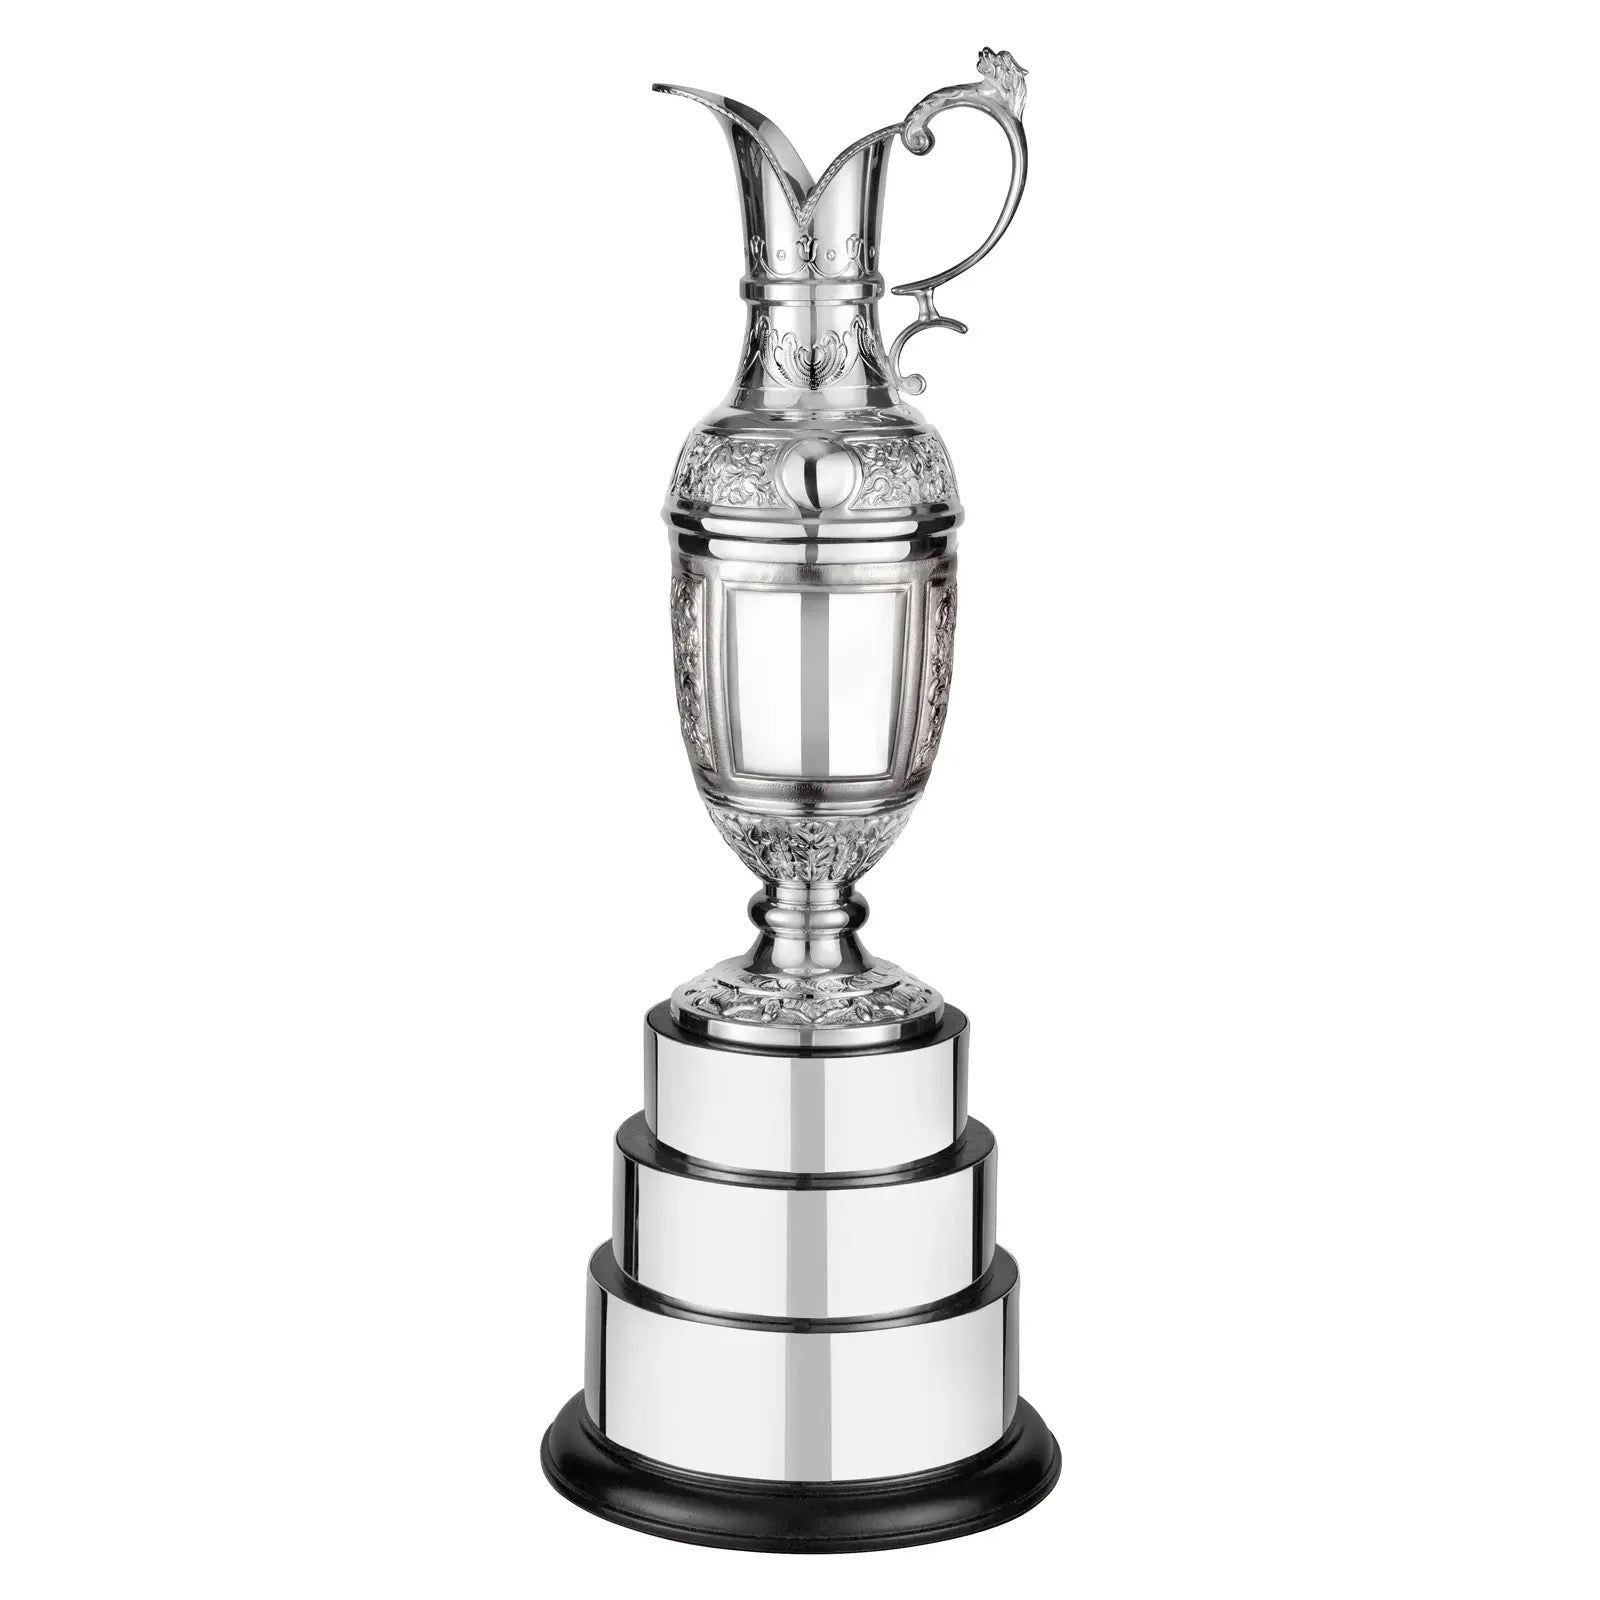 Silver Plated 21in Champions Claret Jug Hand-Chased Award - On 3 Tier Base